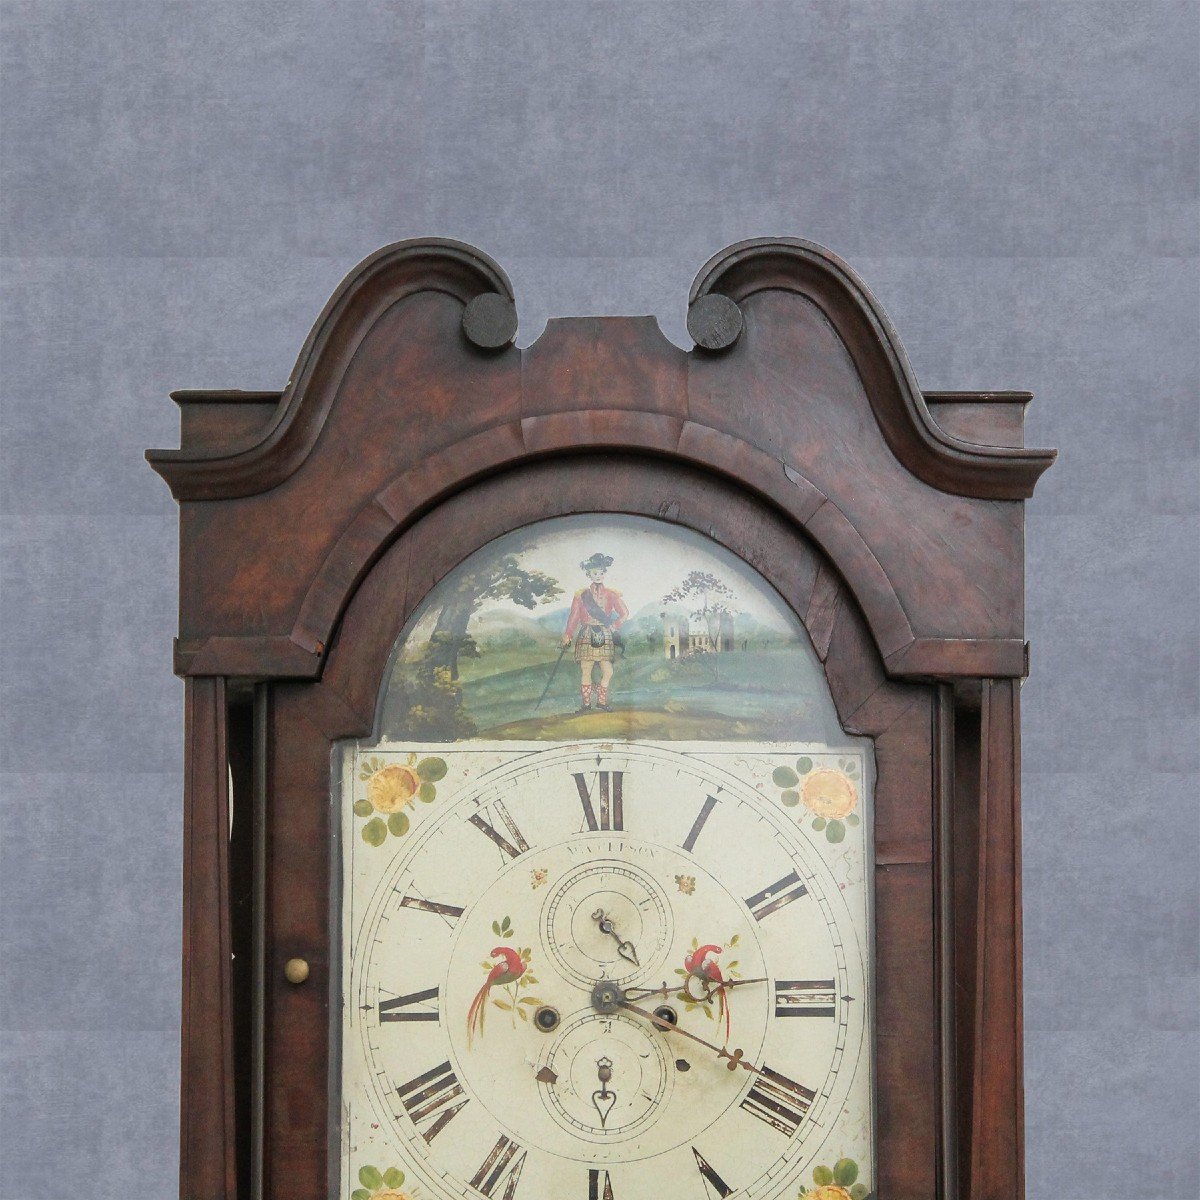 Large And Beautiful George III Style Mahogany Clock, Late 1700s Early 1800s.-photo-2